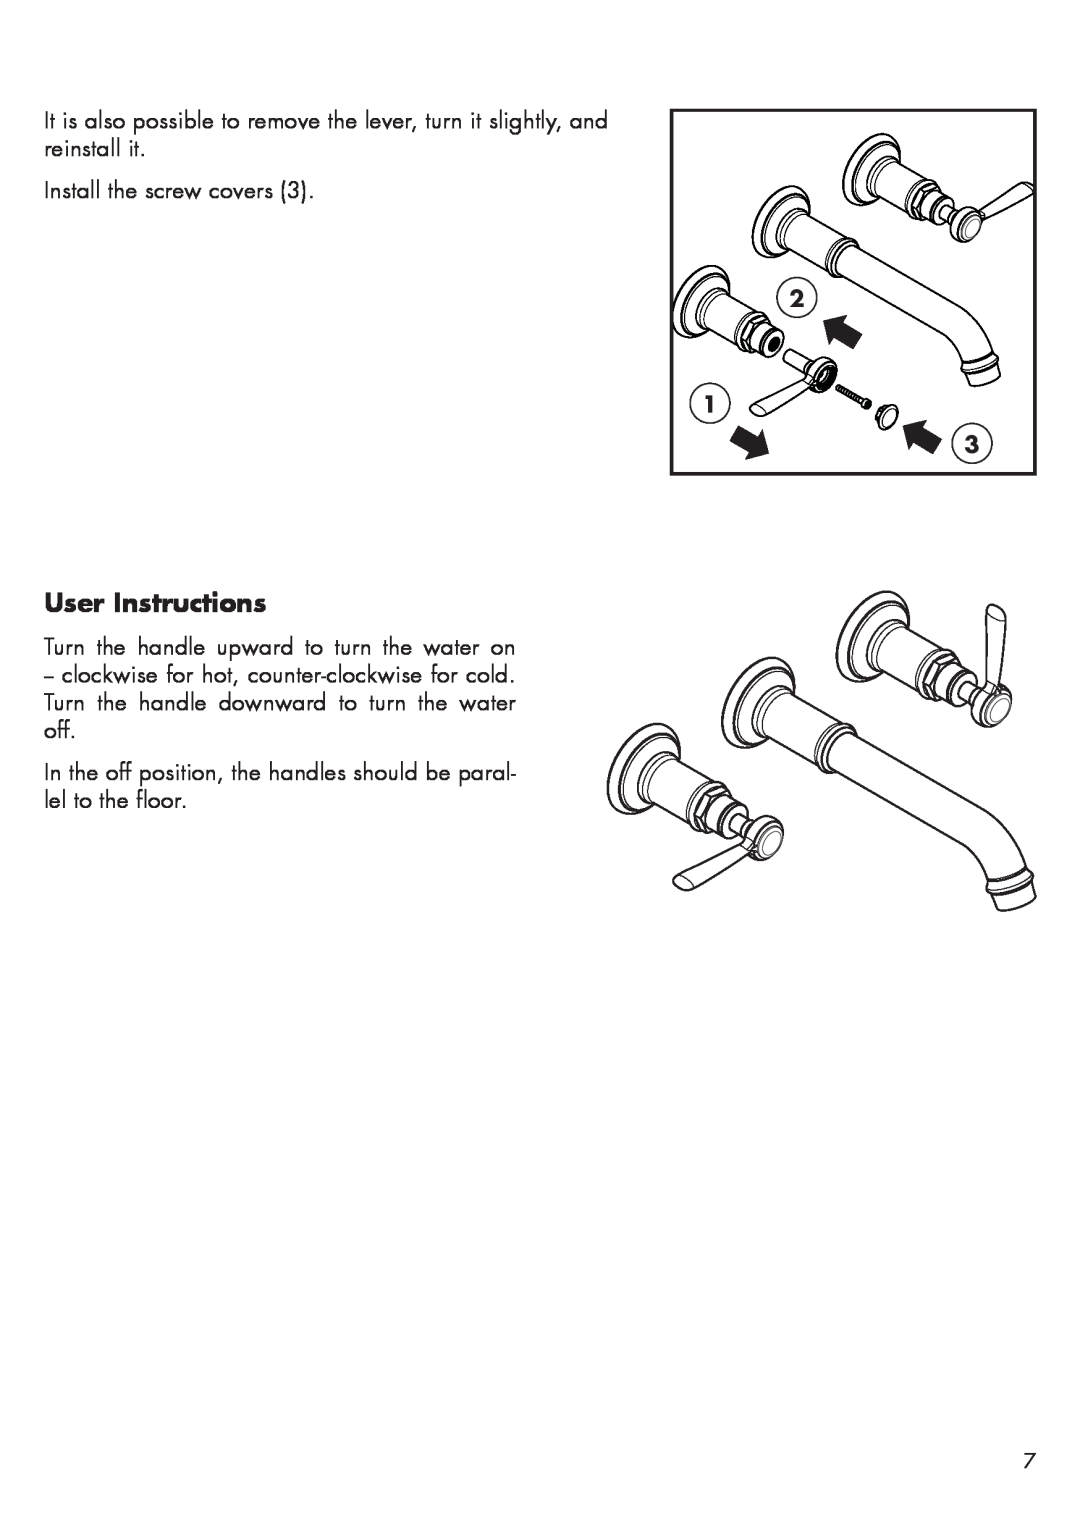 Axor 16534XX1 User Instructions, Install the screw covers, Turn the handle upward to turn the water on 